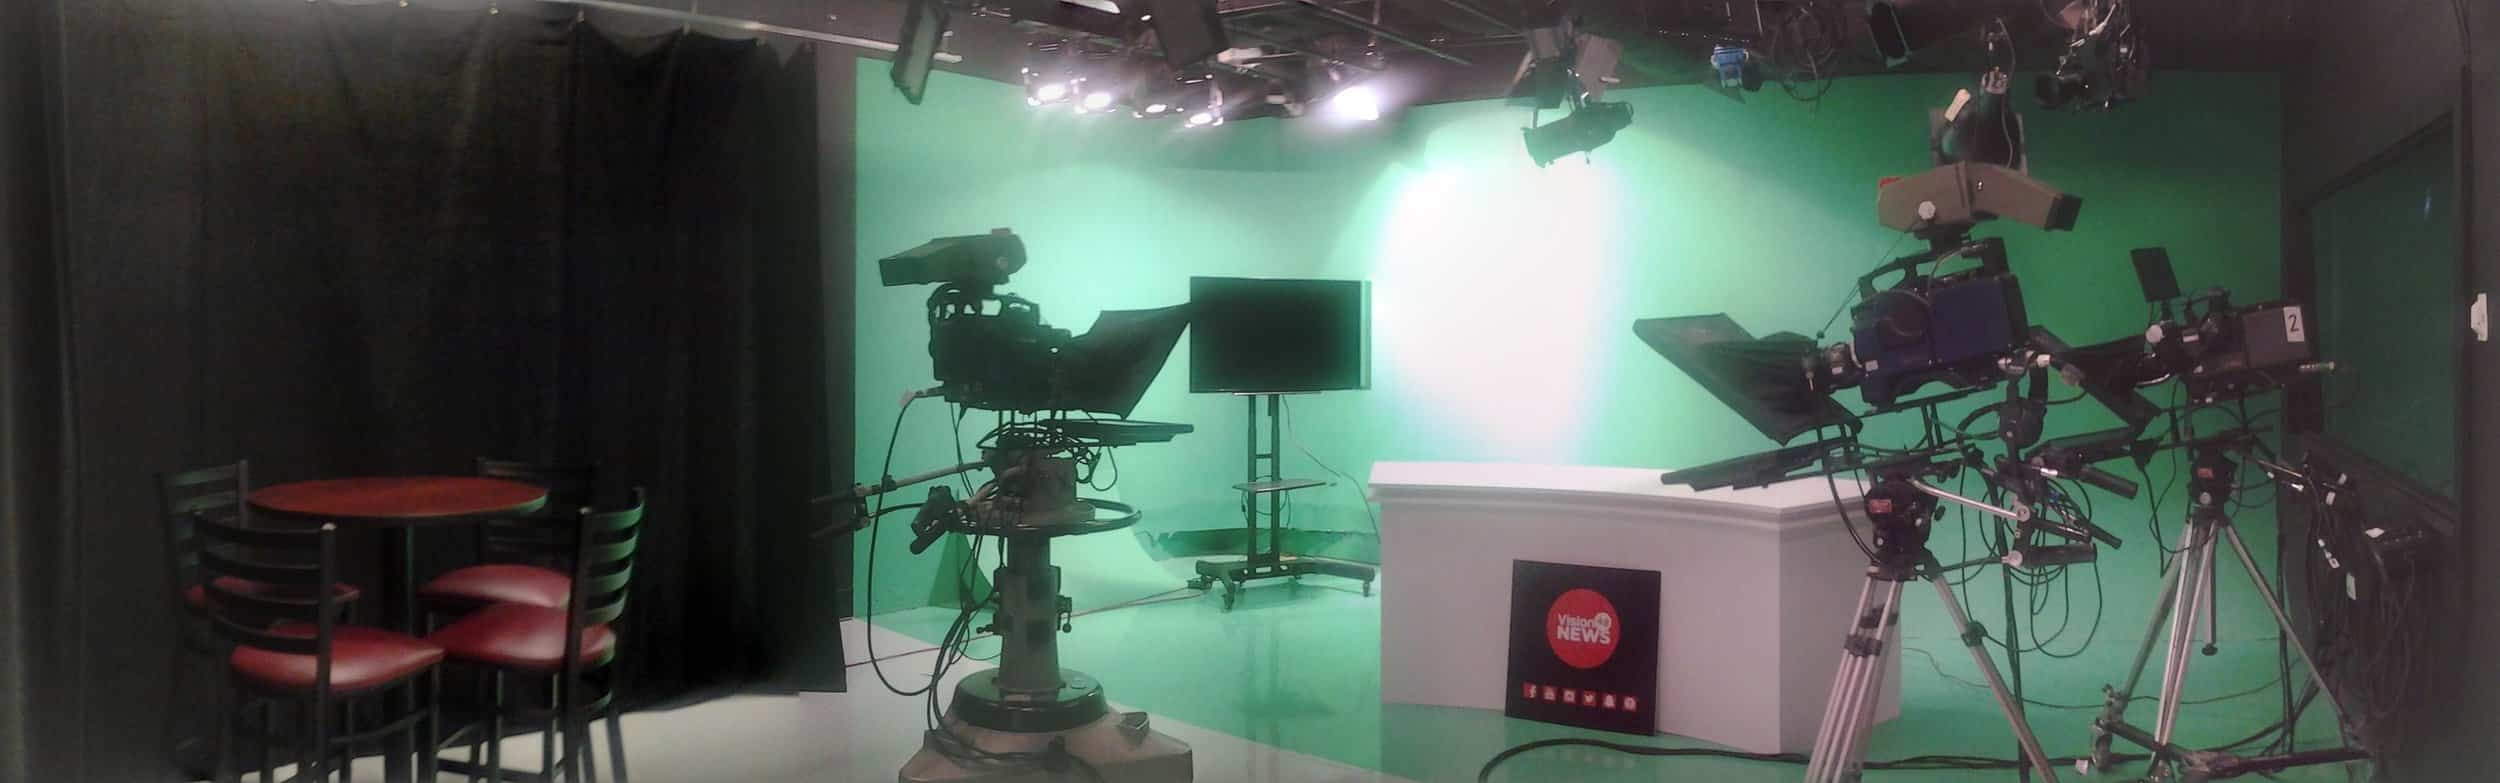 NGU's new television studio will give mass comm students an opportunity to work with updated technology as they prepare for film and video careers.&nbsp; Photo credit: Carrie Henderson and Google Photos